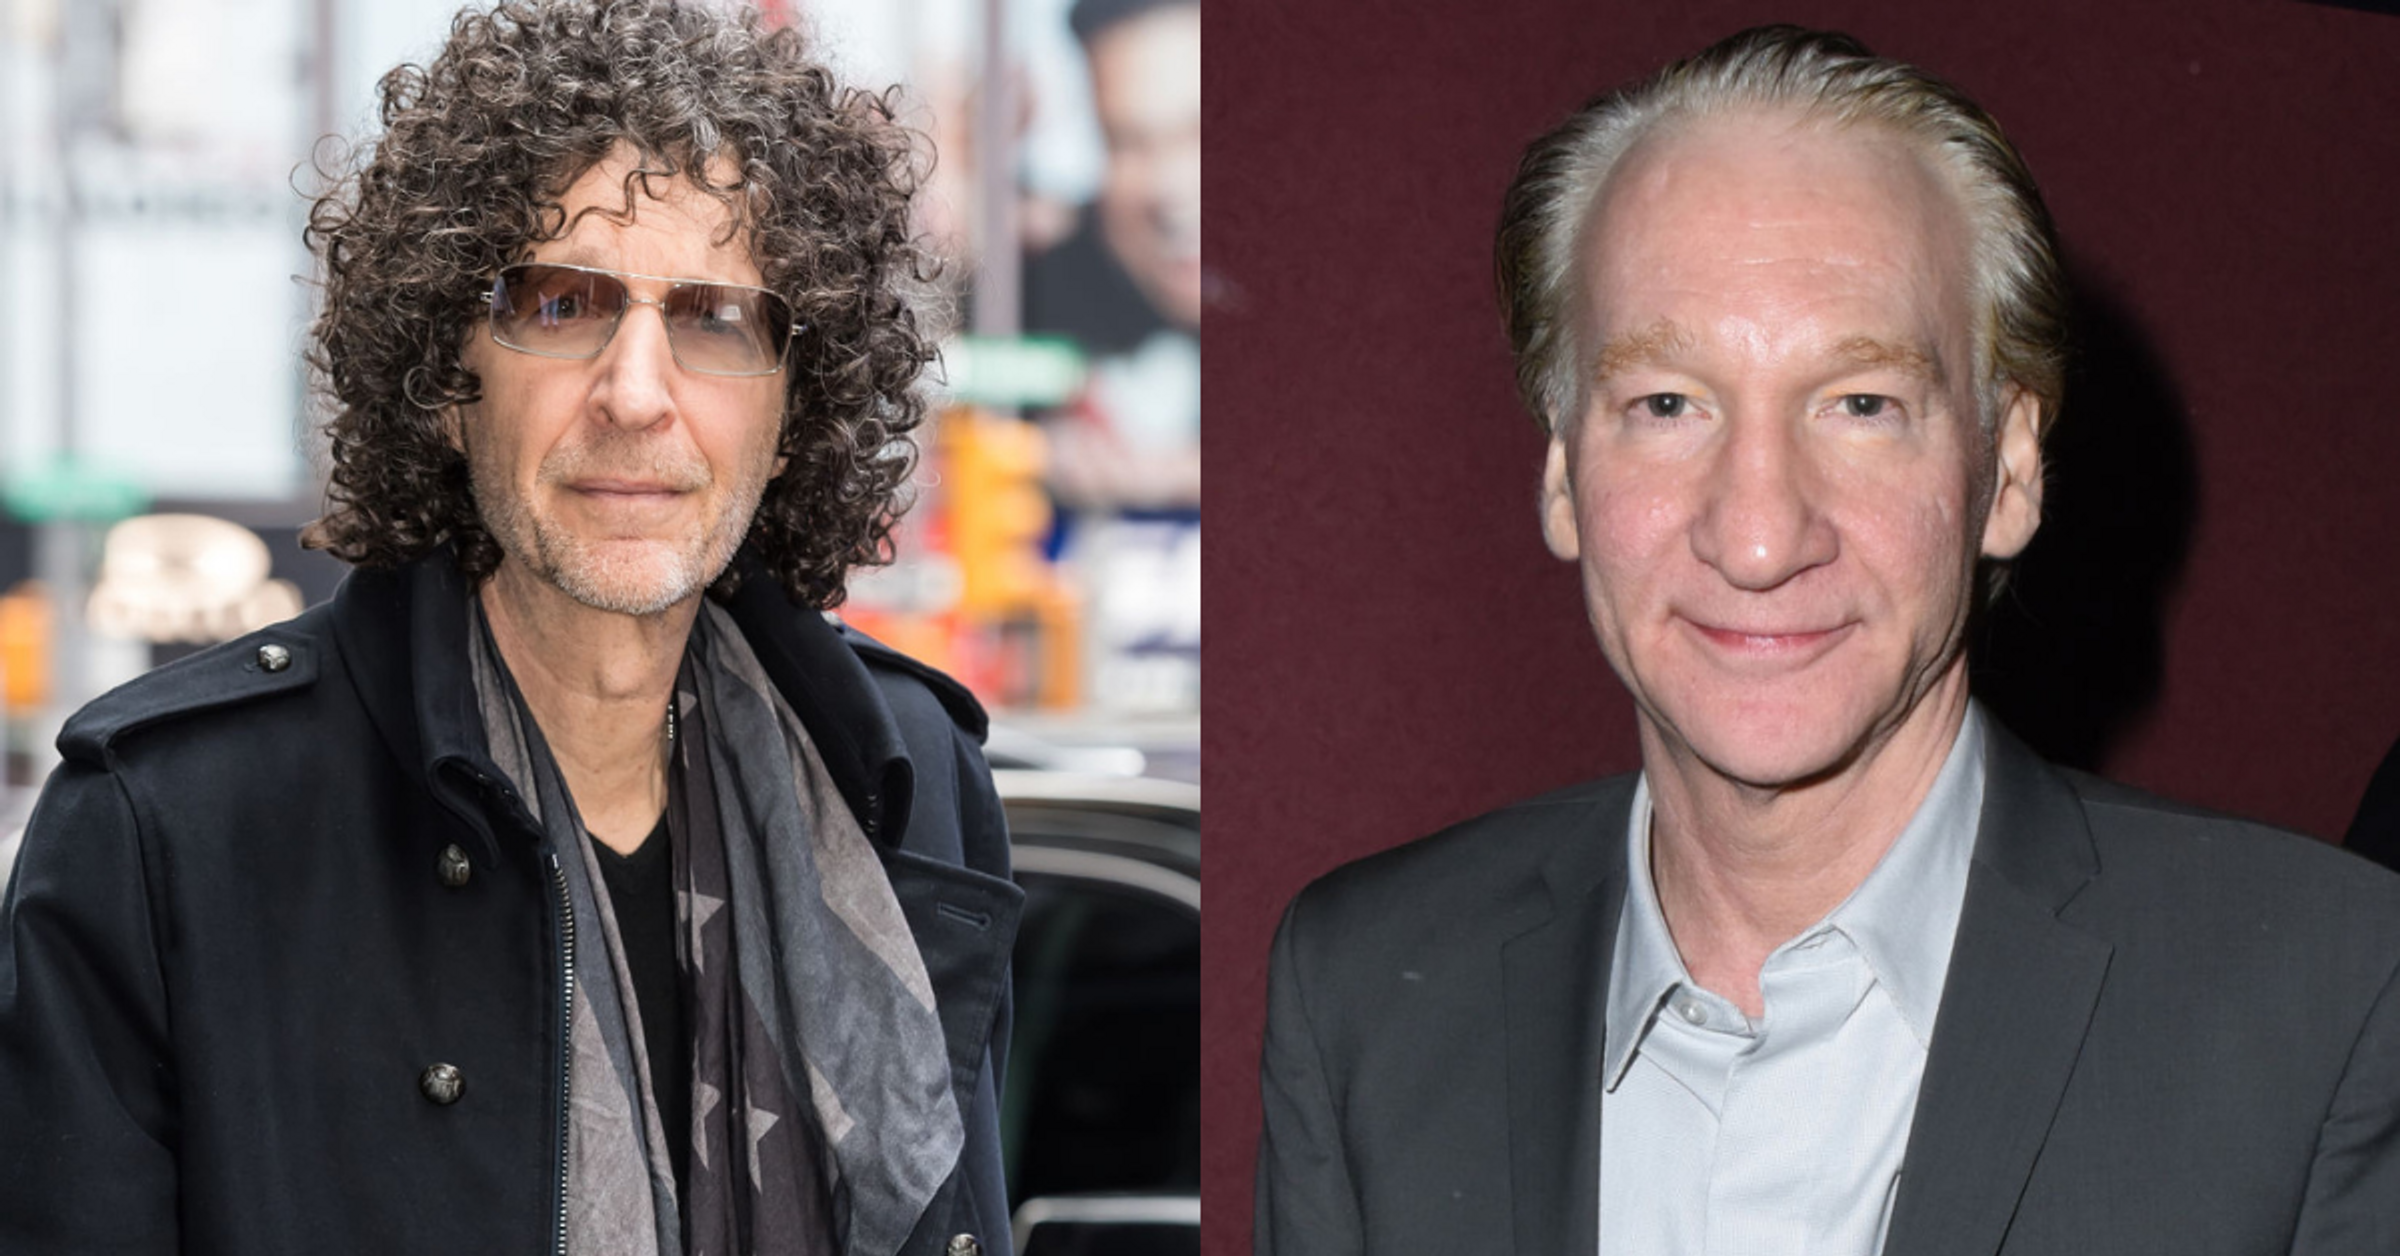 Howard Stern Tells Bill Maher To ‘Shut His Mouth’ After His ‘Sexist’ Comments About Stern’s Marriage (comicsands.com)